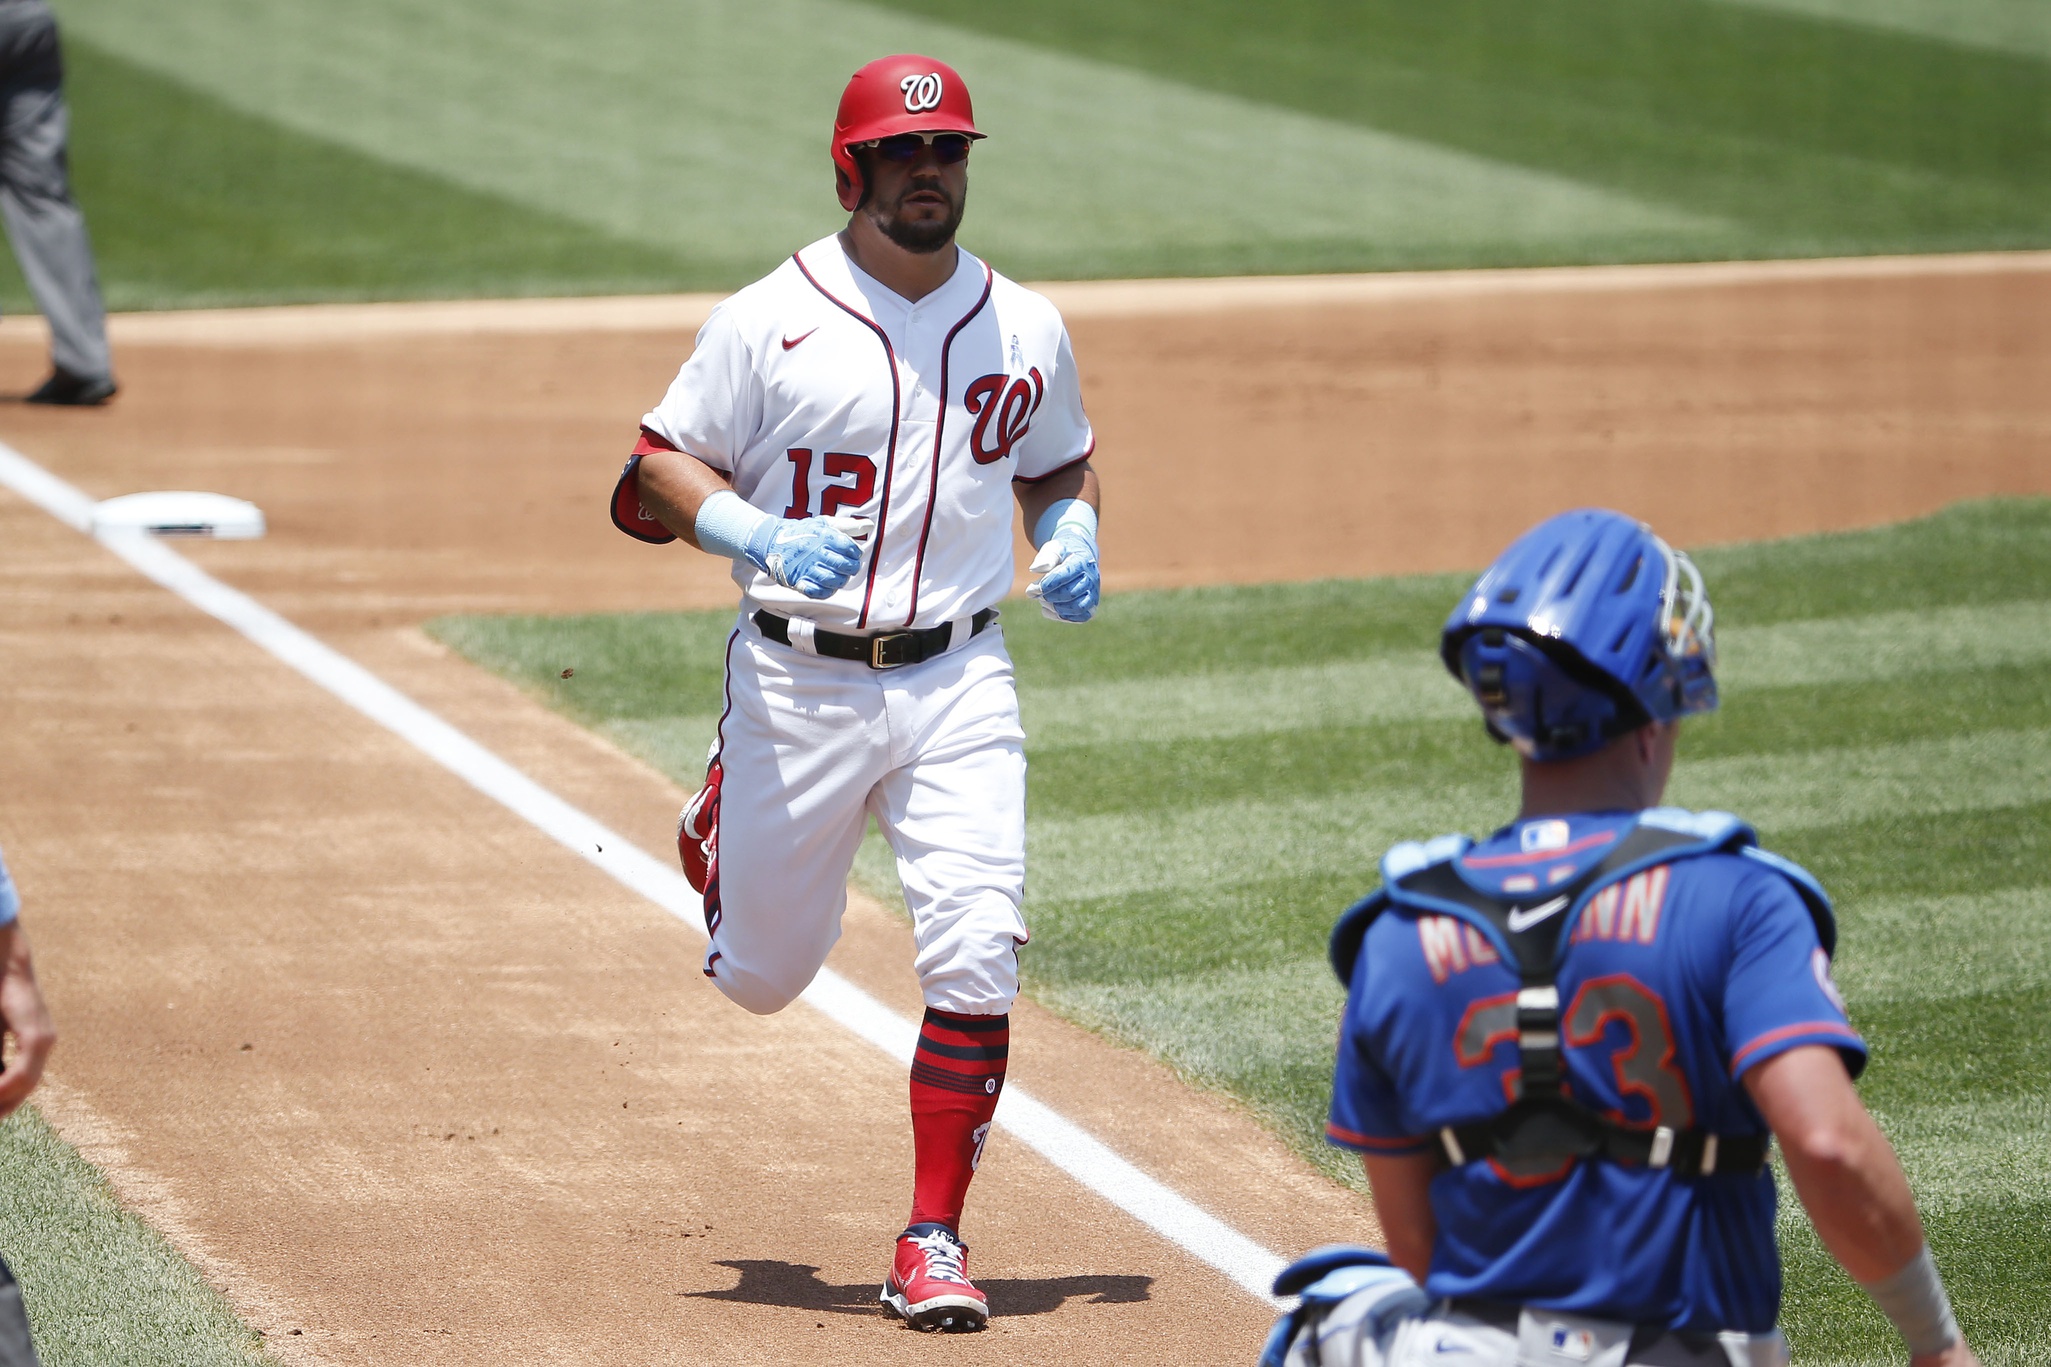 Schwarber Launches Three Dingers as Nationals Capture Series Victory